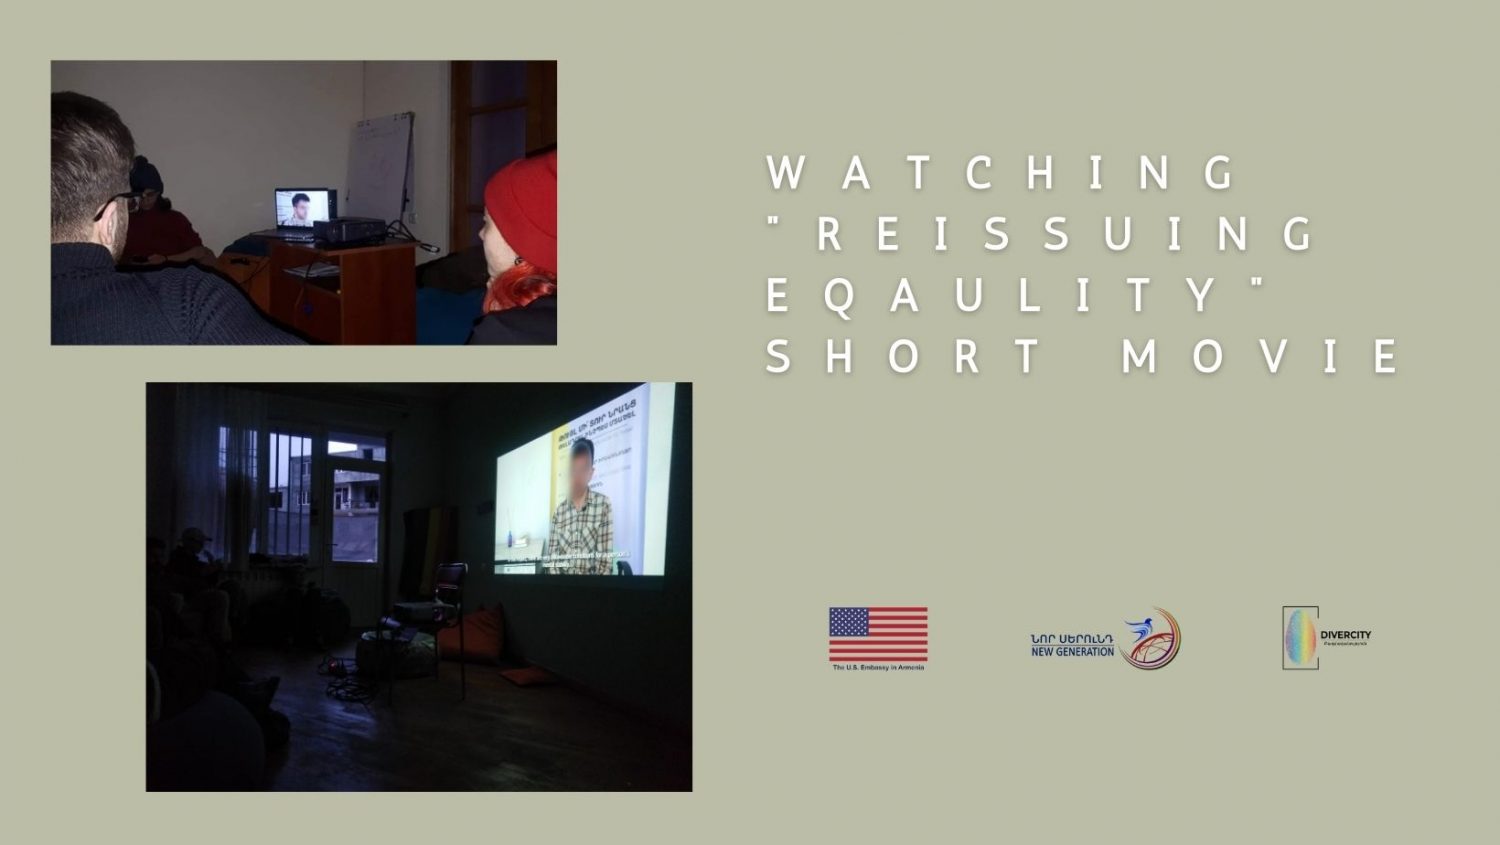 Screening of the short movie “Reissuing Equality”